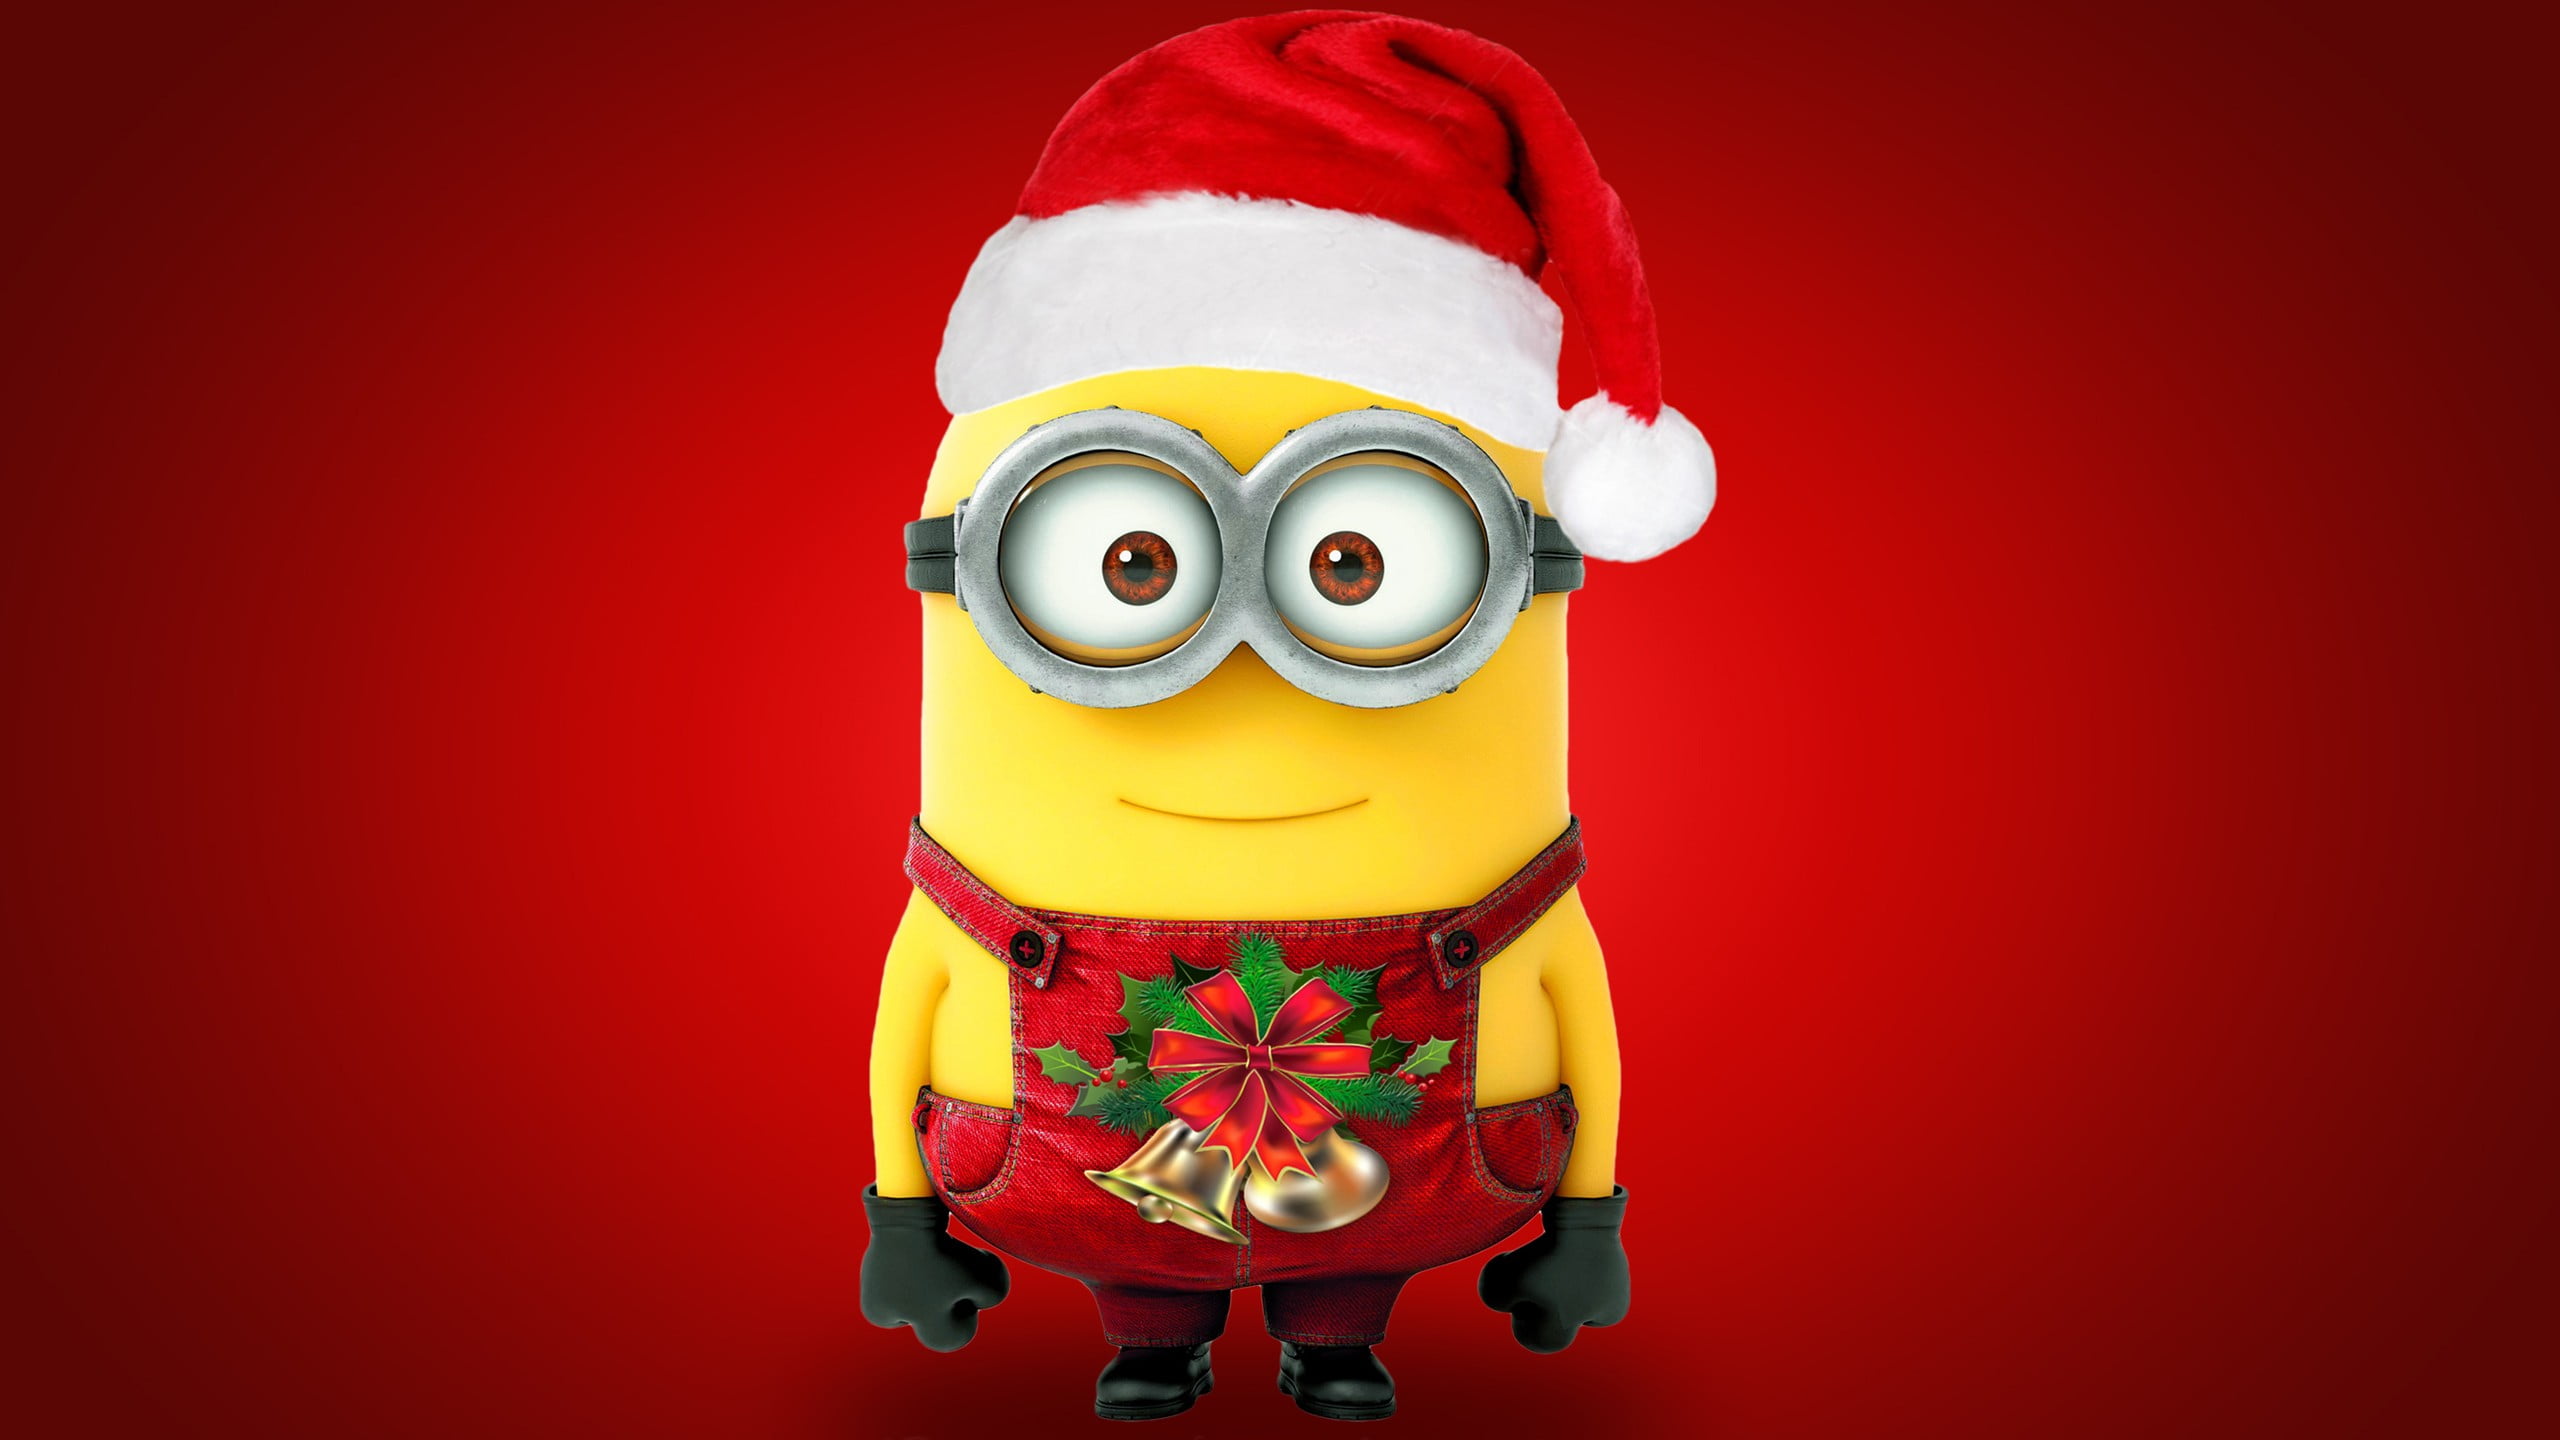 Christmas Theme Minion Digital Wallpaper Despicable Me Christmas Minions Red Background Hd Wallpaper Wallpaper Flare